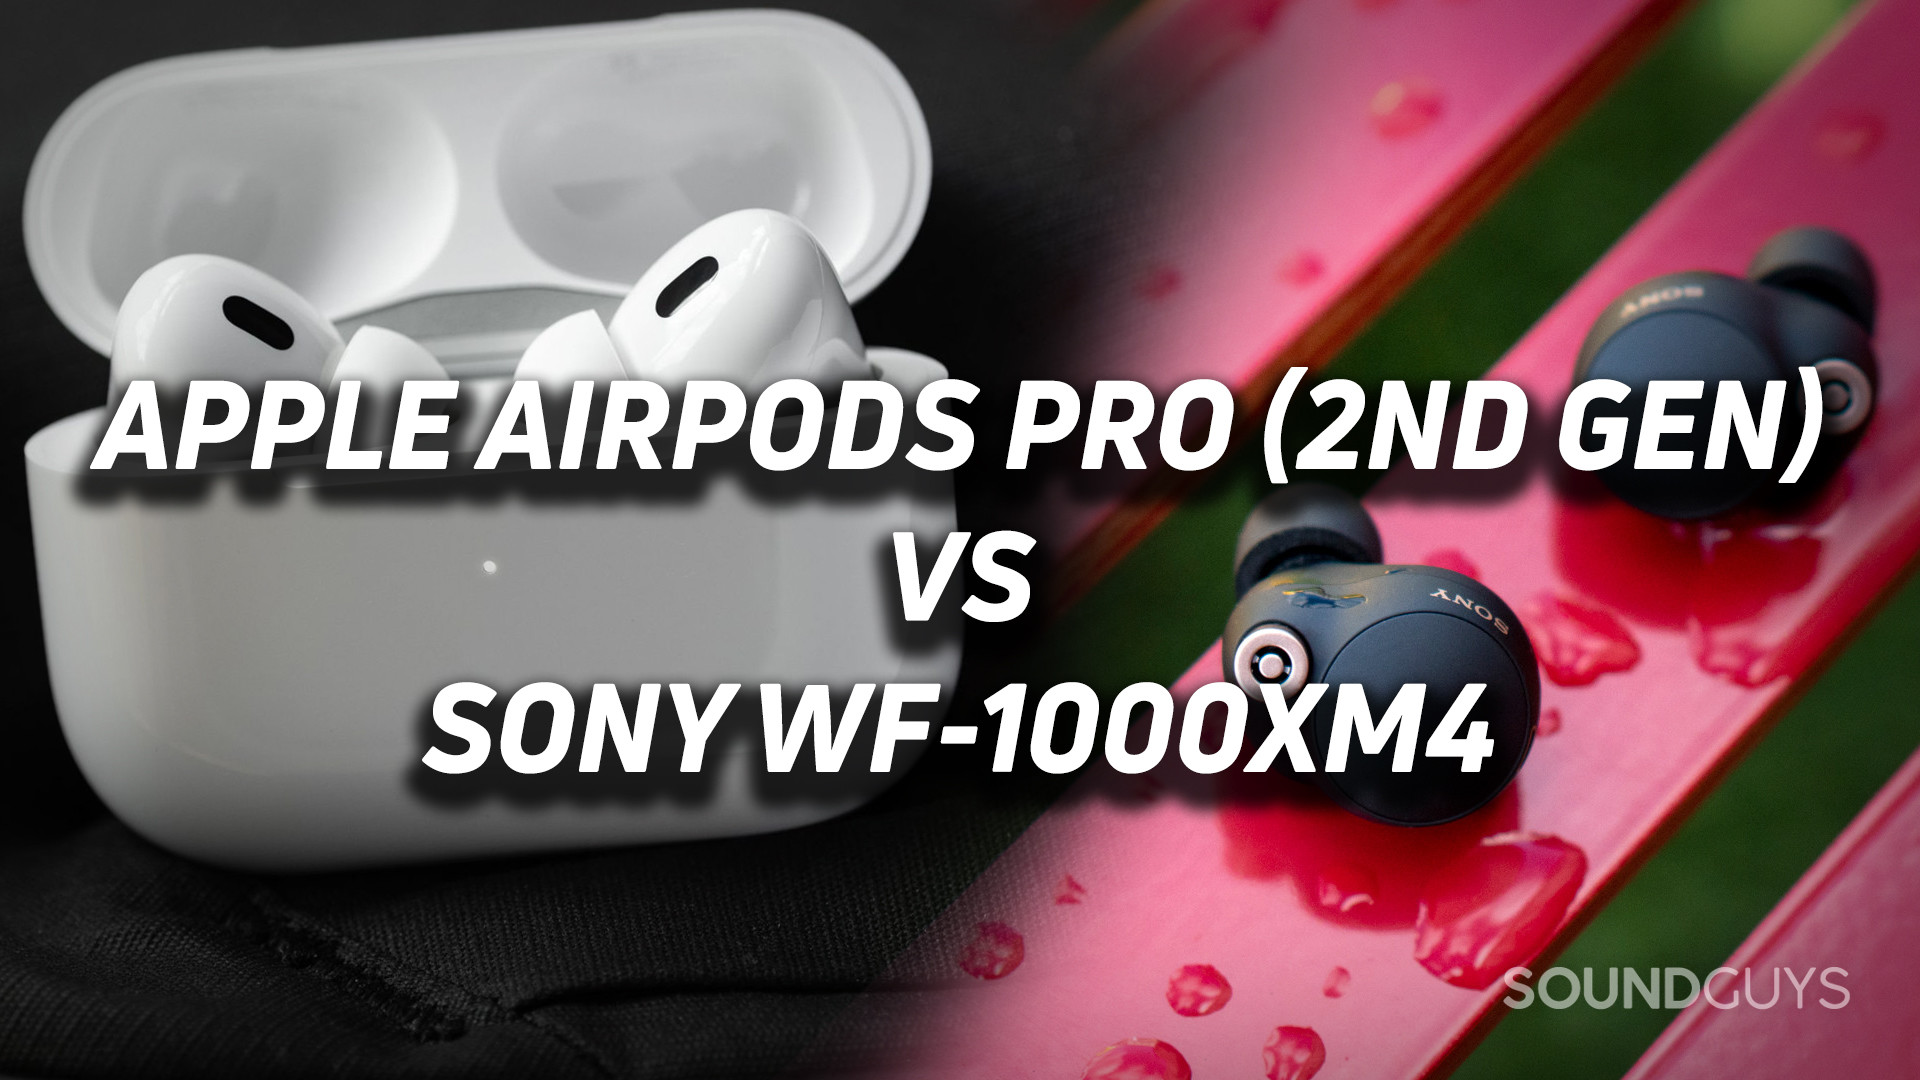 Apple AirPods Pro vs AirPods: Leave it to the Pro - SoundGuys